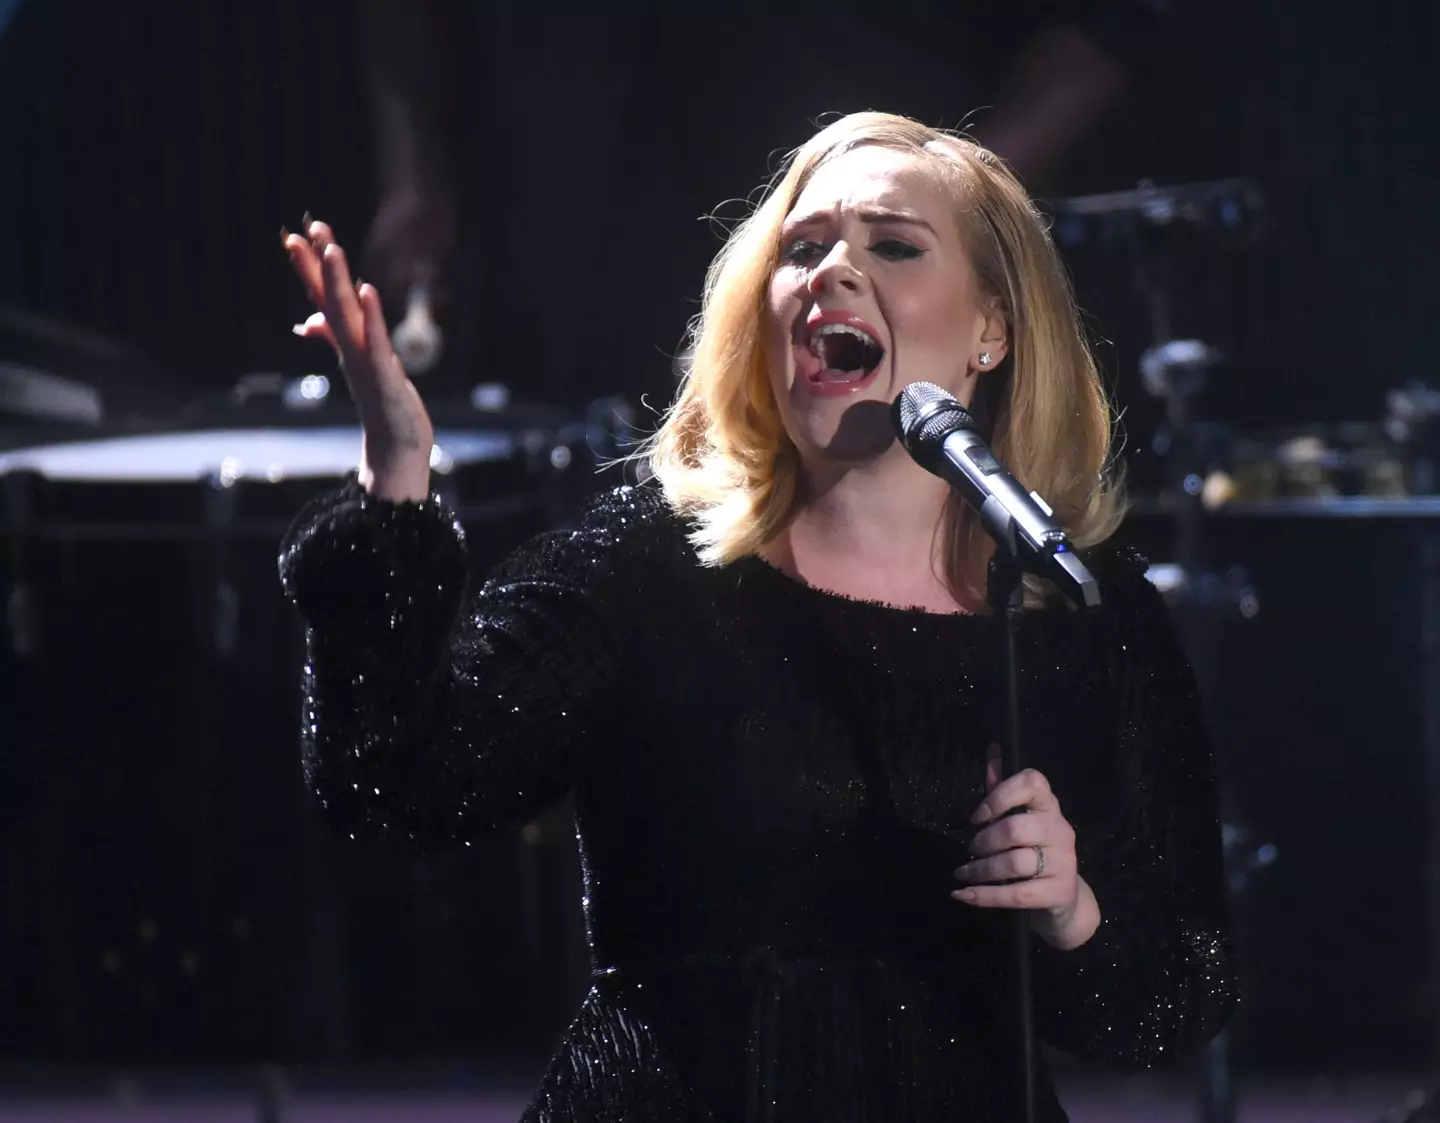 Adele’s unmistakable London accent is almost as iconic as her singing voice.